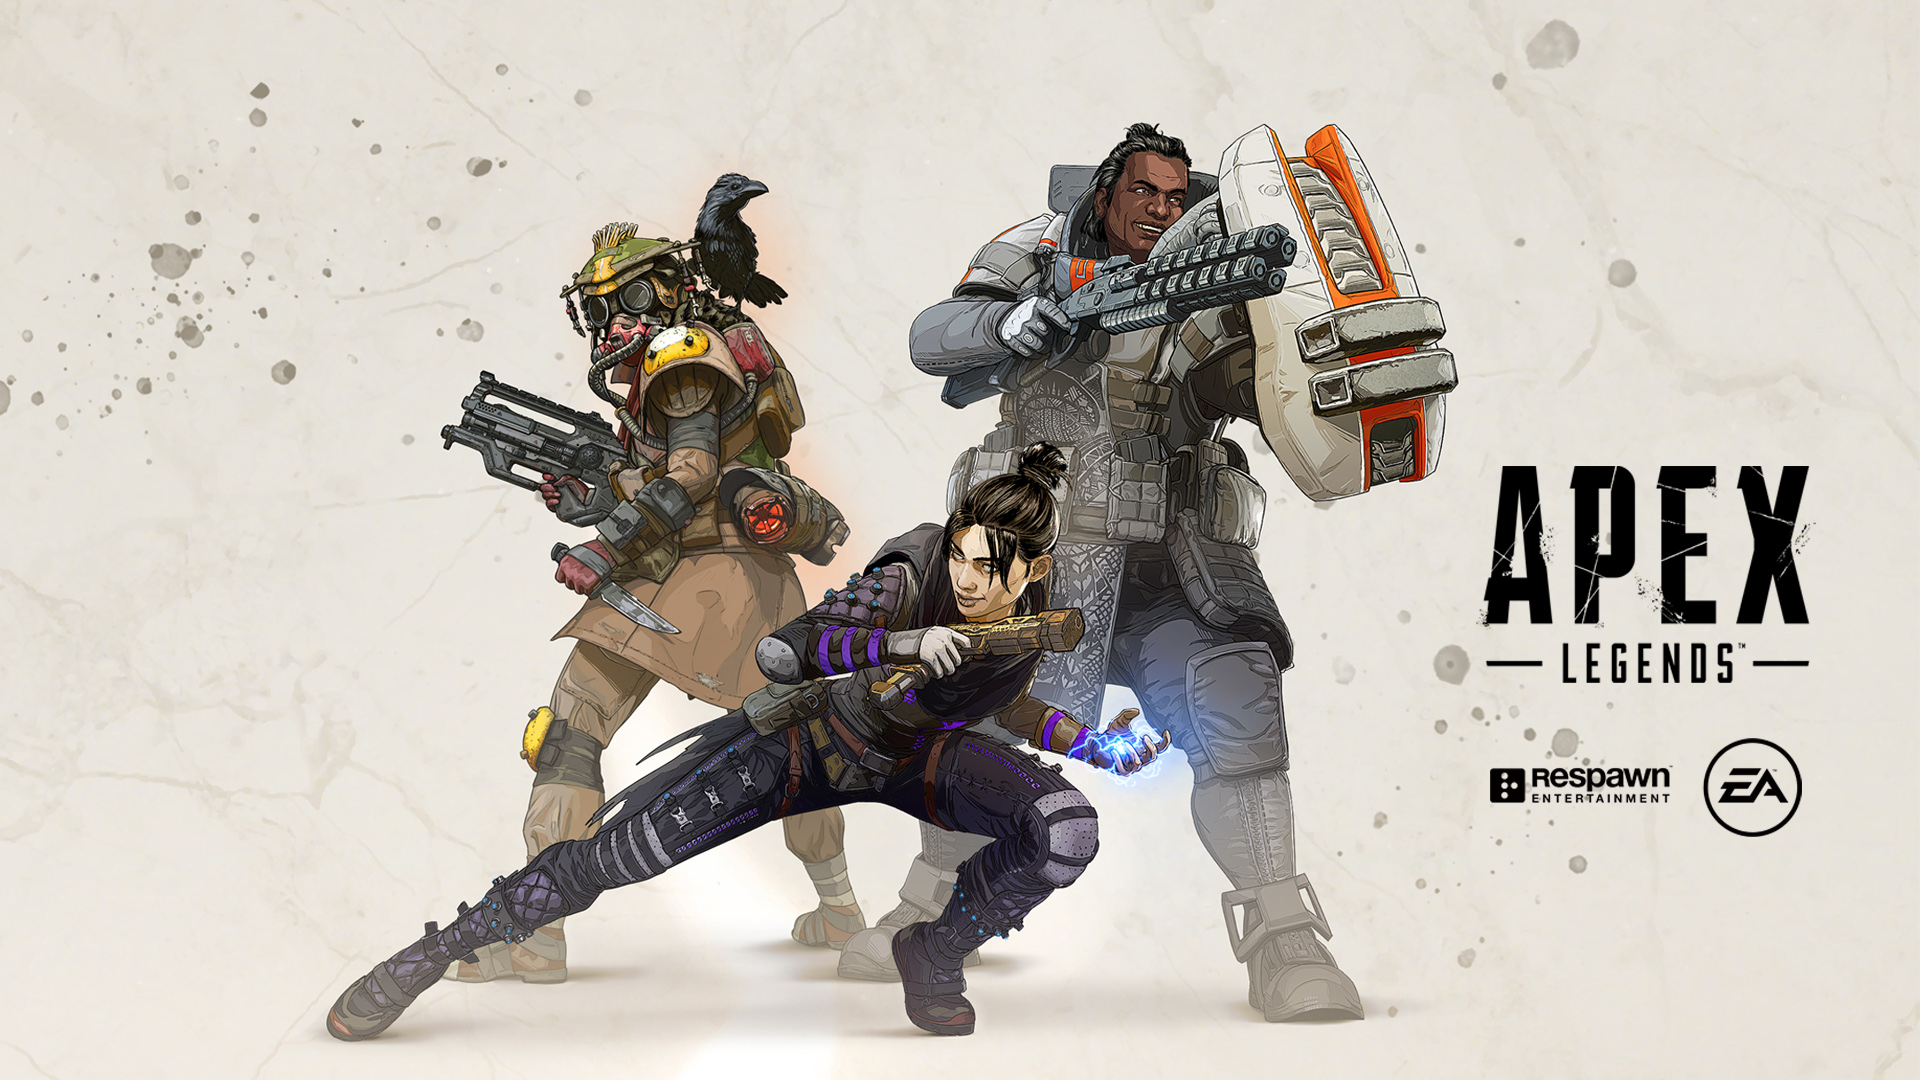 Three Apex legends heroes posing on a beige background with the text Apex Legends.